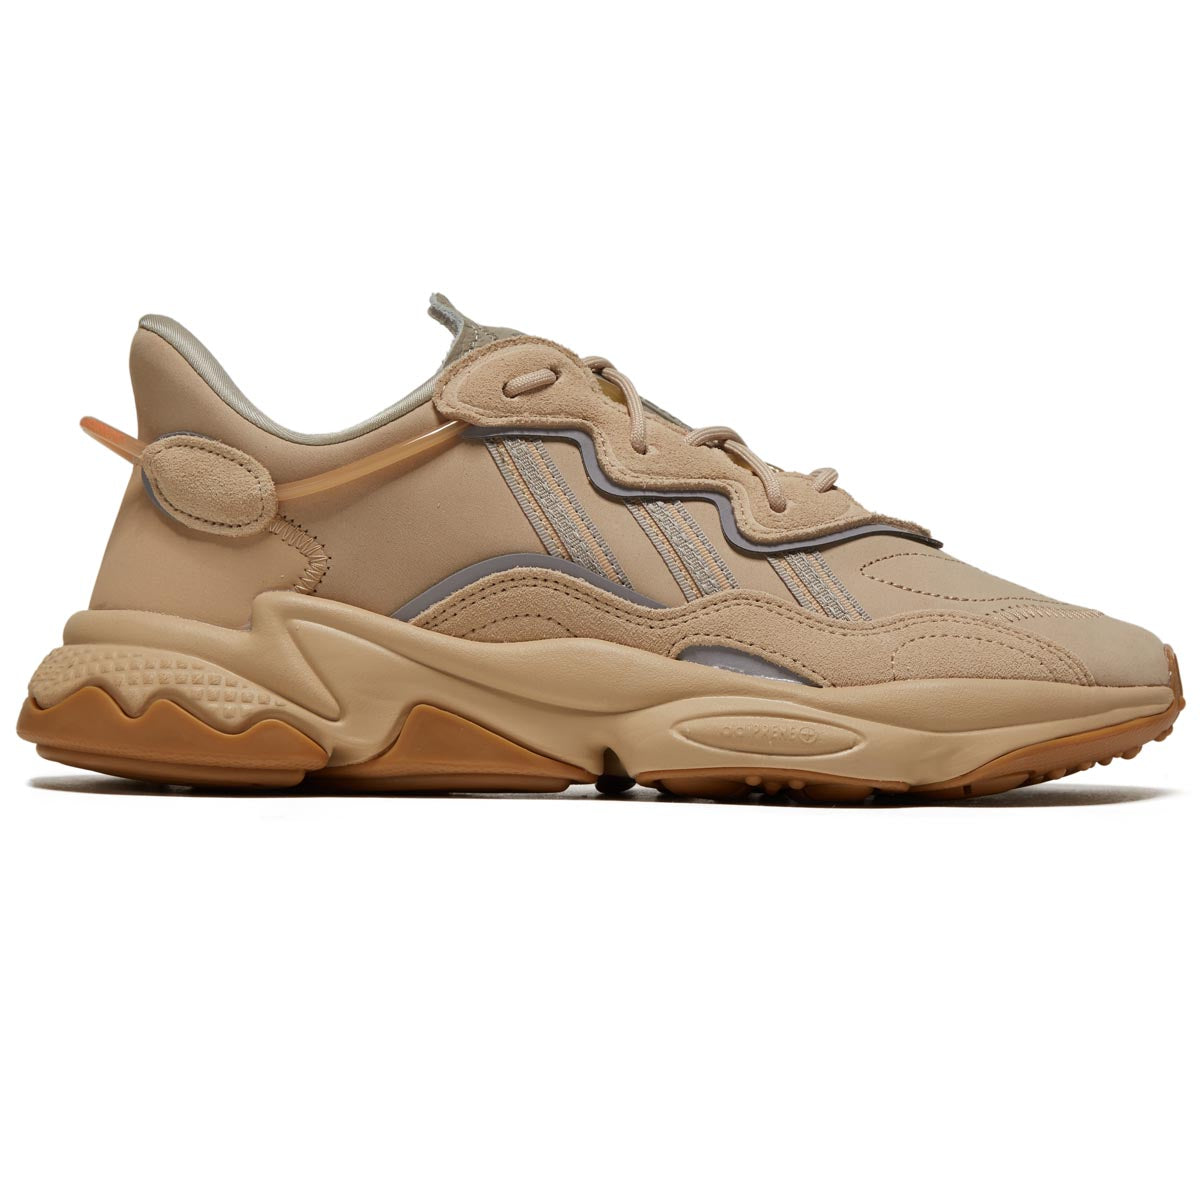 Adidas Ozweego Shoes - St Pale Nude/Light Brown/Solar Red image 1